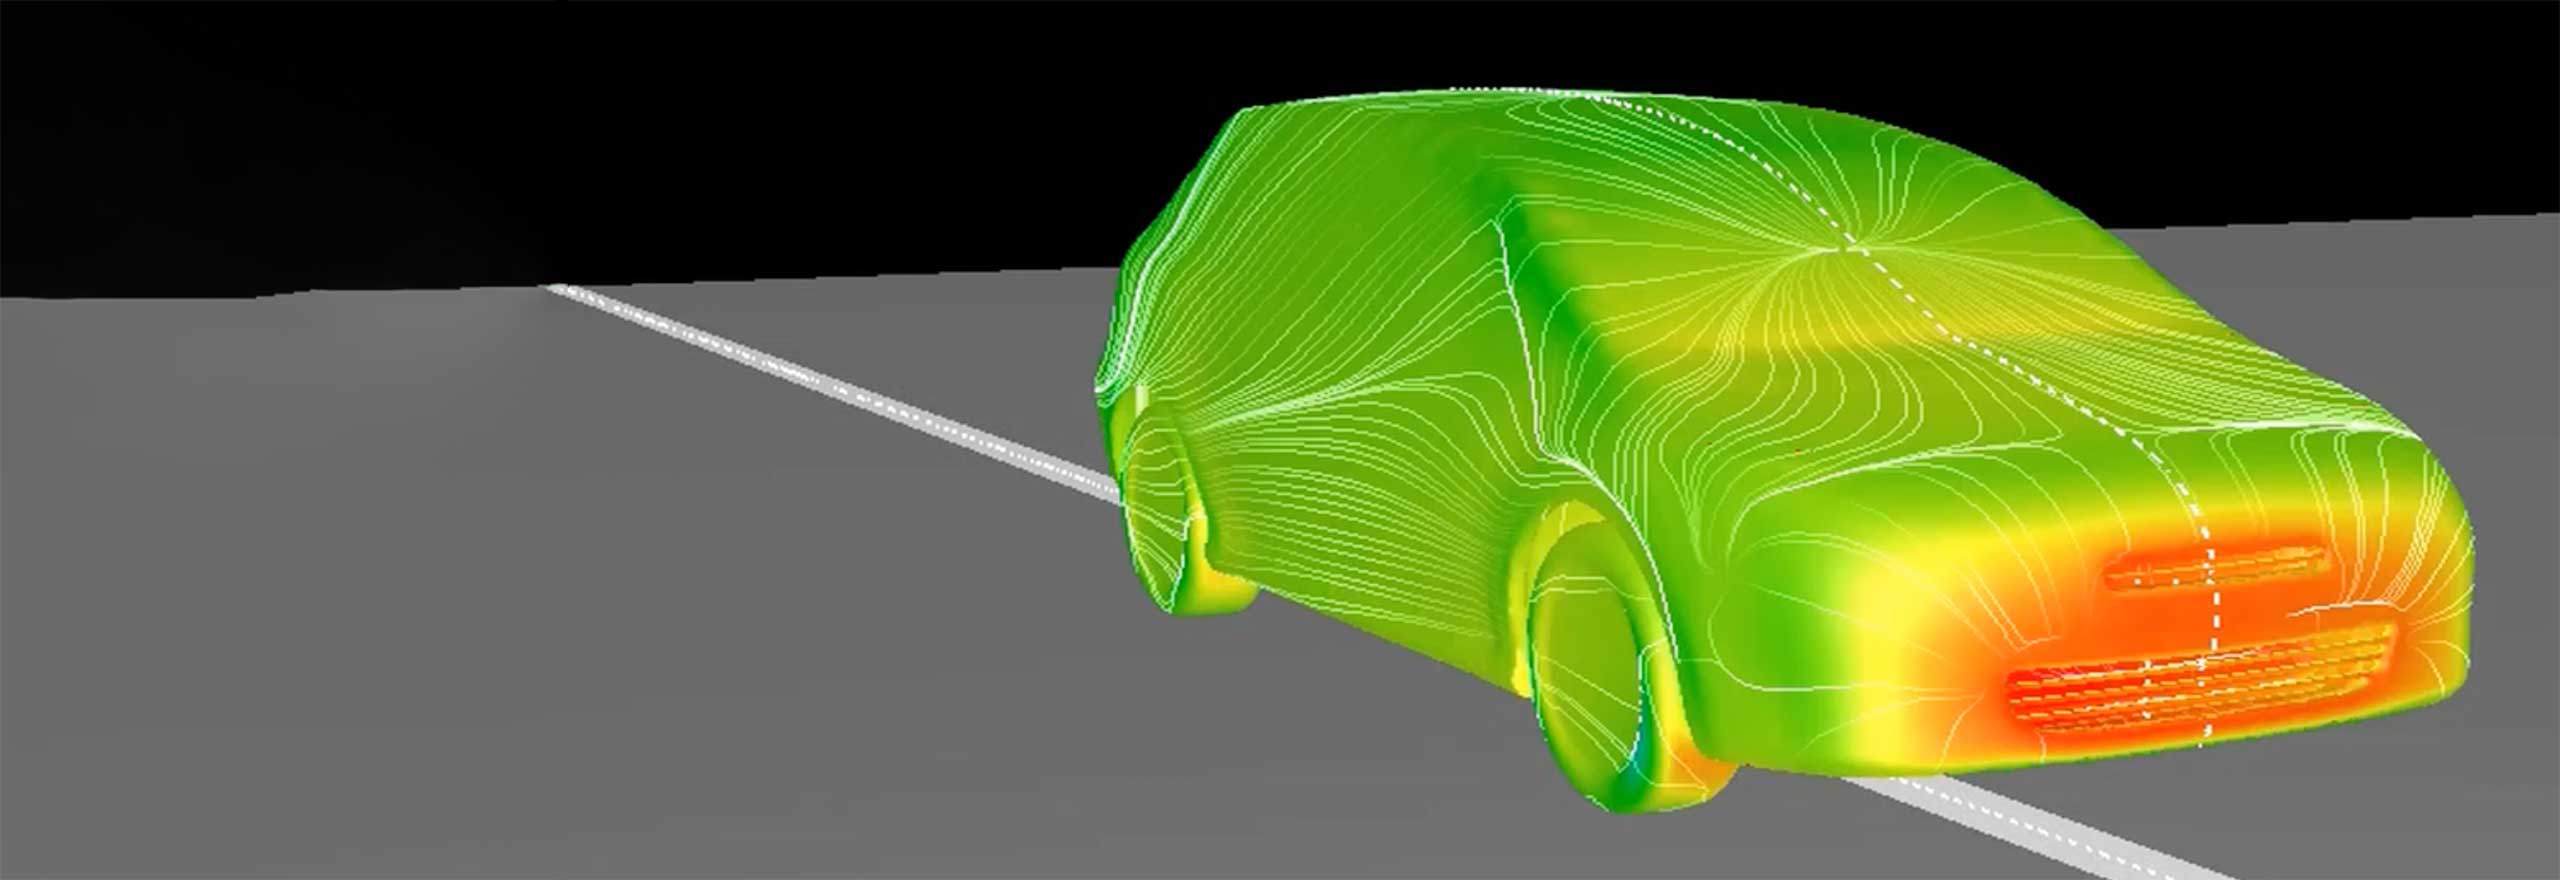 Multiphysics cosimulation showing Adams-scFLOW prediction of dynamic vehicle suspension movement in a strong crosswind